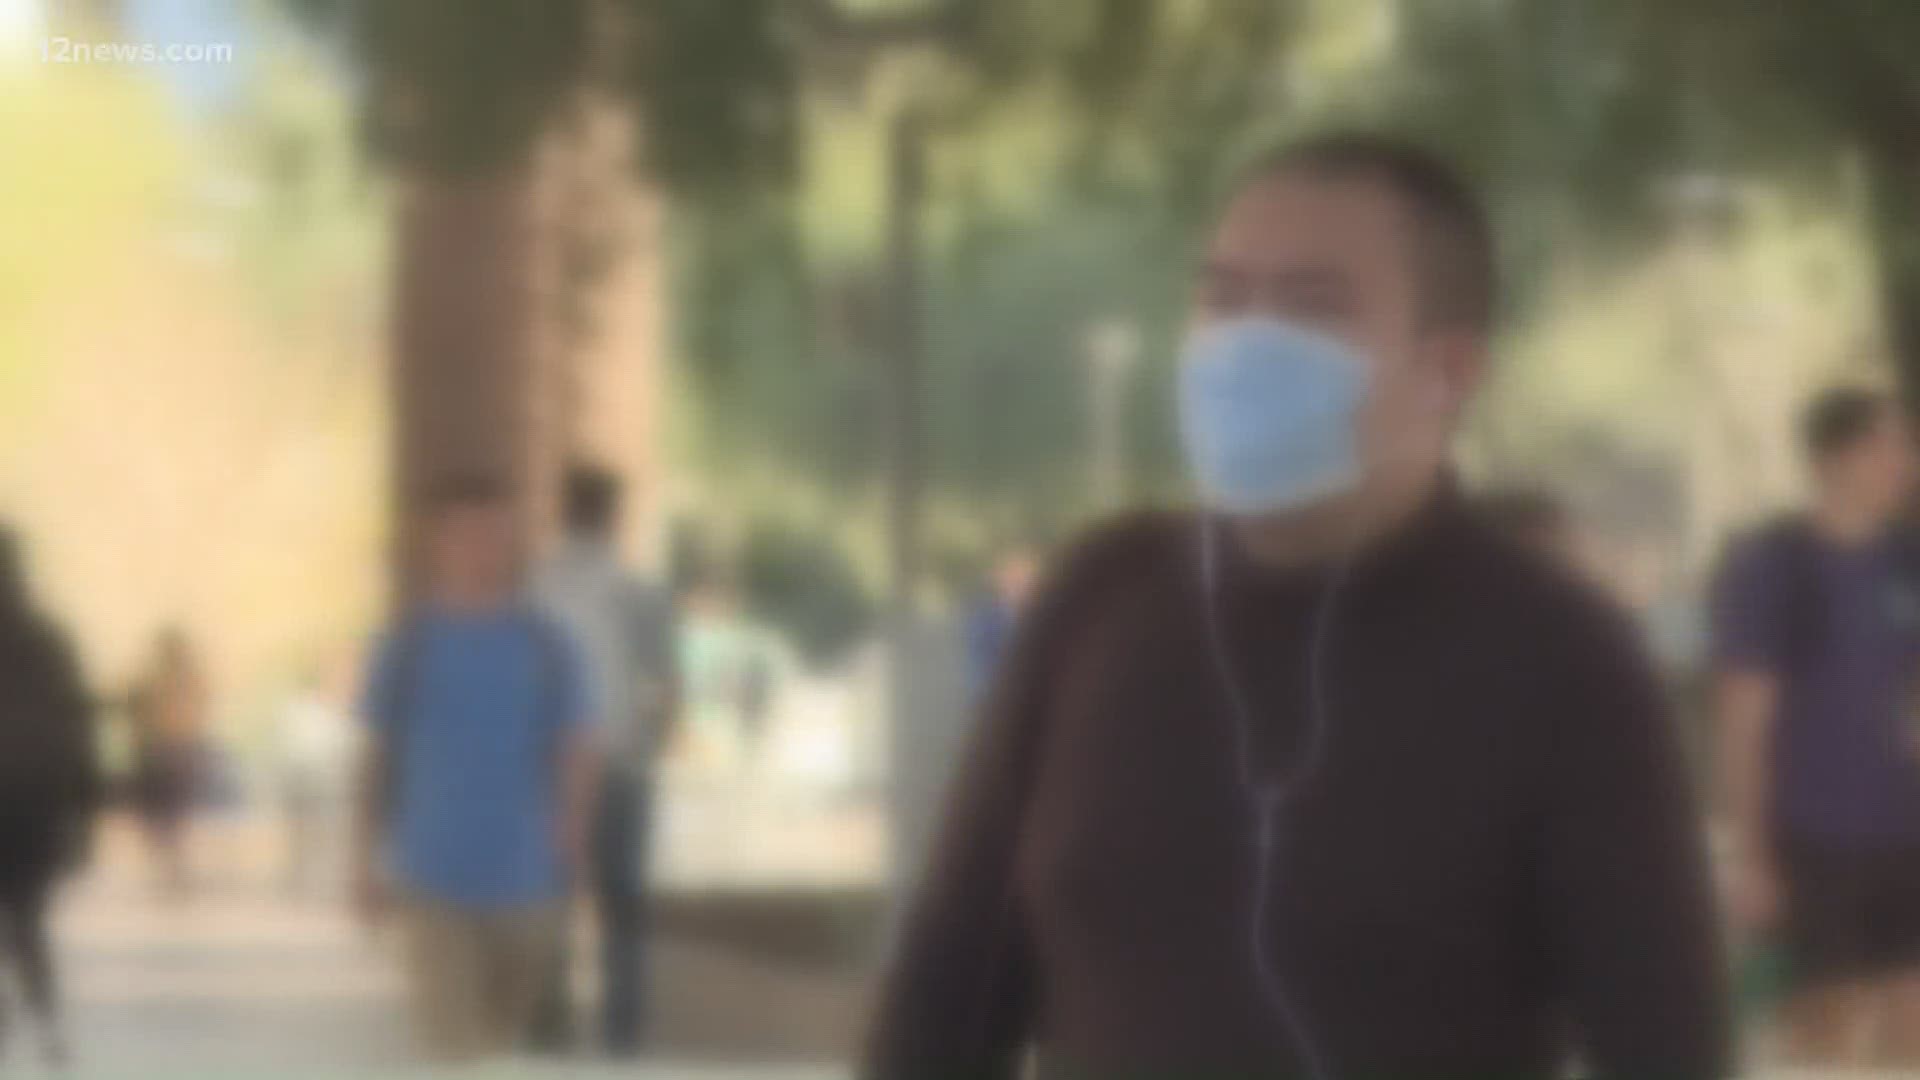 All students, faculty members and visitors to ASU's campuses will be required to wear masks while on campus. ASU's president says the change is necessary.